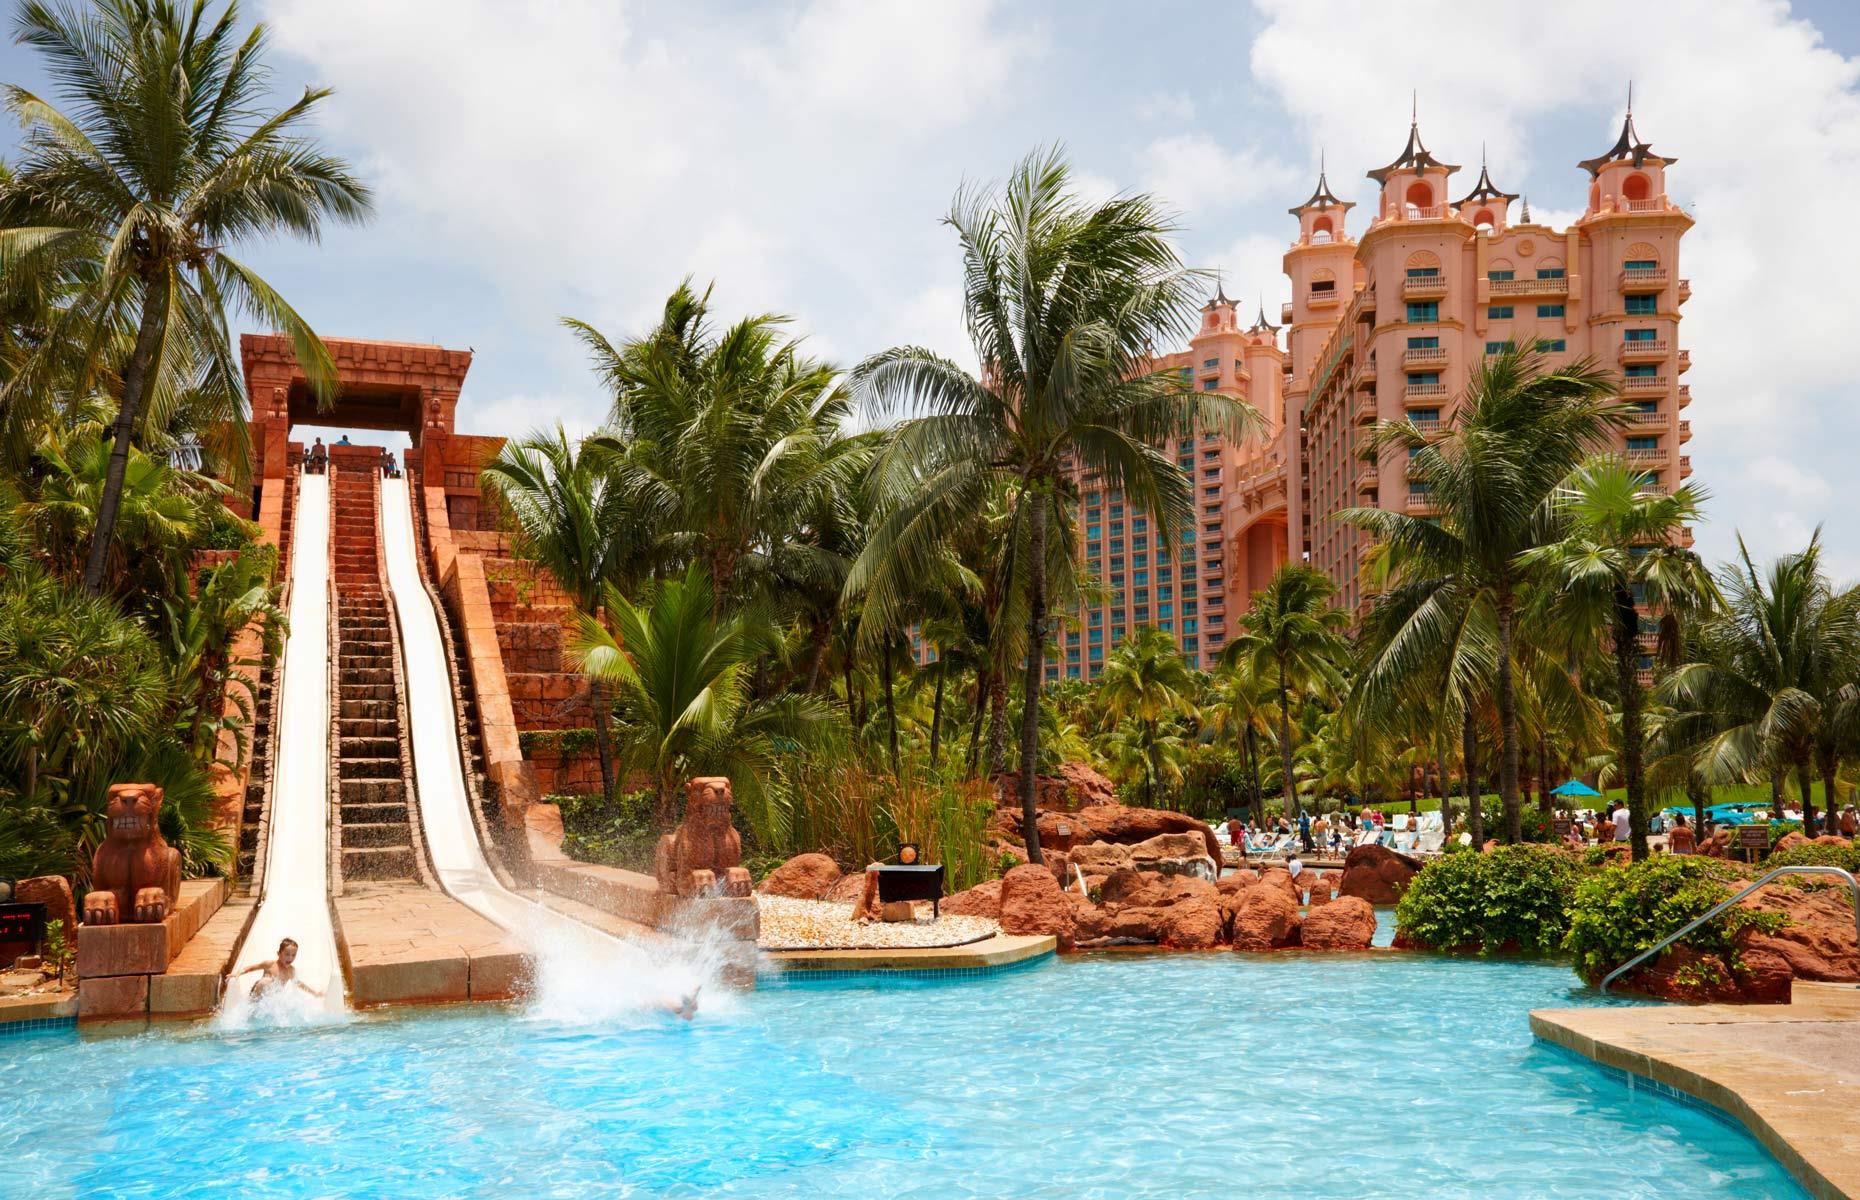 <p>Designed with a Maya civilisation theme, Aquaventure Waterpark is surrounded by tropical greenery and part of the hotel Atlantis, Paradise Island. Launch yourself from the top of the Mayan Temple on the Leap of Faith (pictured) to drop down a near vertical clear tunnel at high speed, shooting through a shark-filled tank. Or twist and turn around the temple's dark core on the Serpent Slide. The sedate Jungle Slide takes children on a watery safari through jungles and caves. They'll also love firing the water cannons in the play fort.</p>